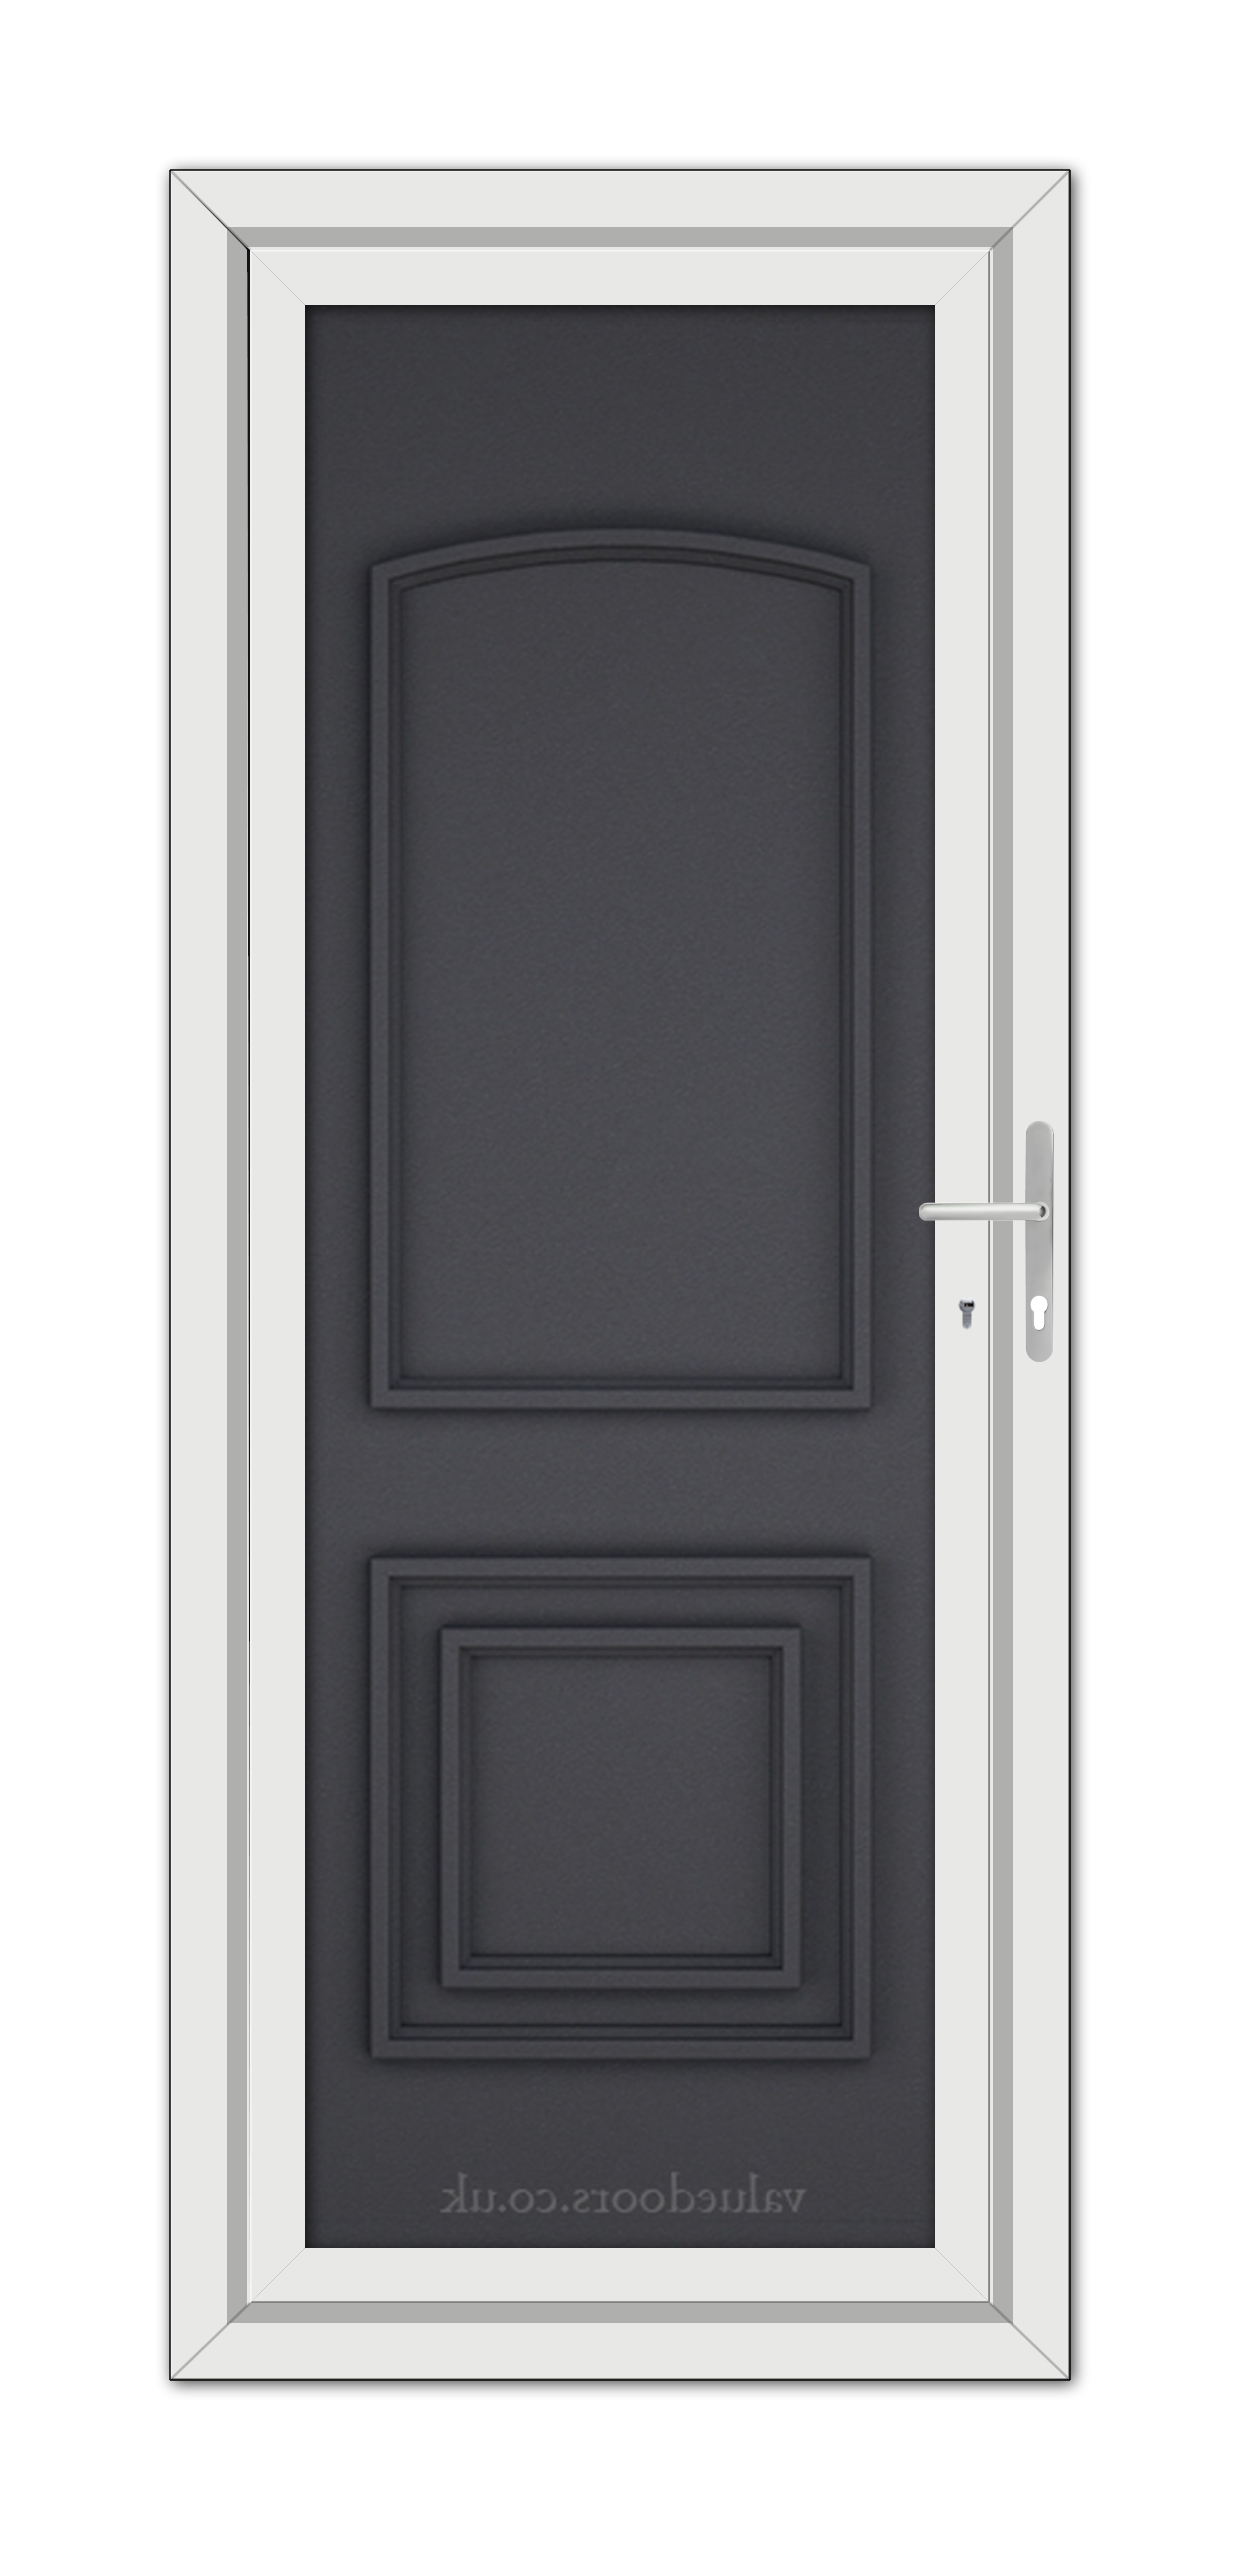 A vertical image of a Grey Grained Balmoral Classic Solid uPVC door with a simple squared design, featuring a silver handle on the right side, set within a white frame.